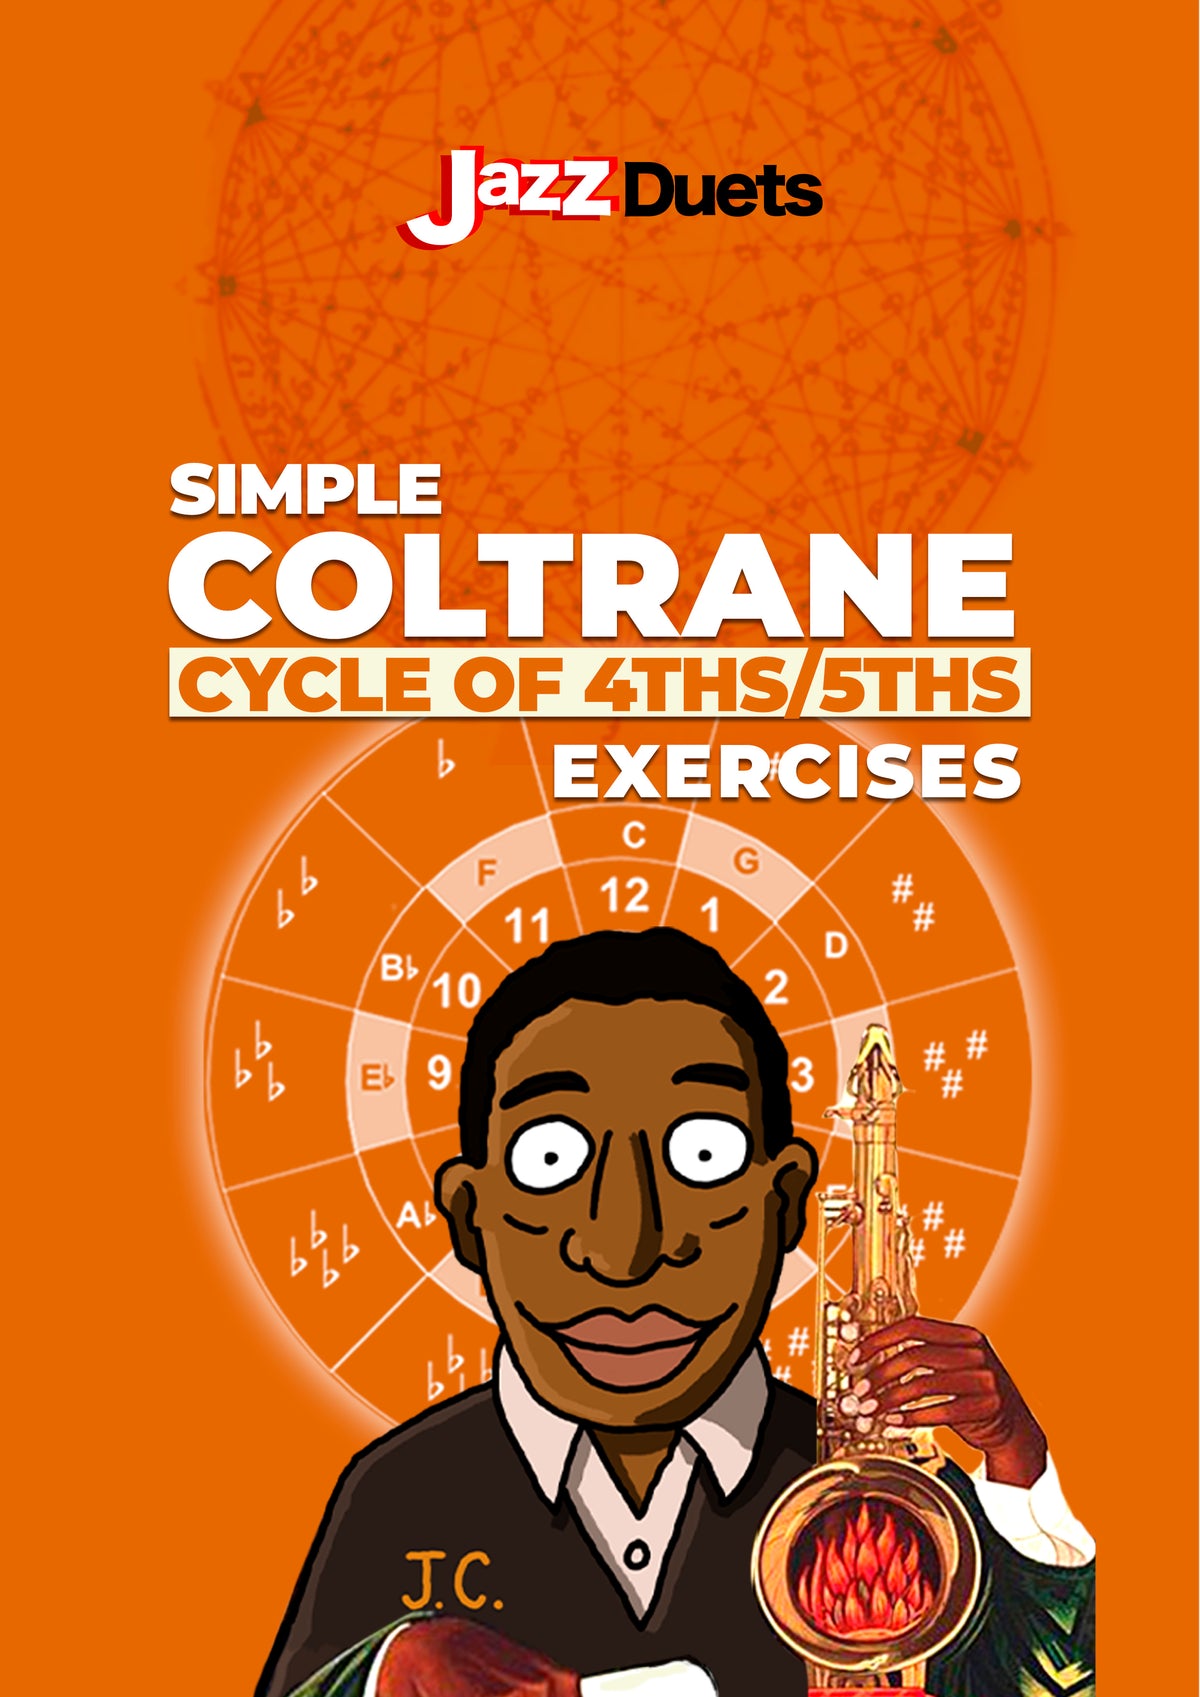 Coltrane Cycle 5 Exercises Digital Download